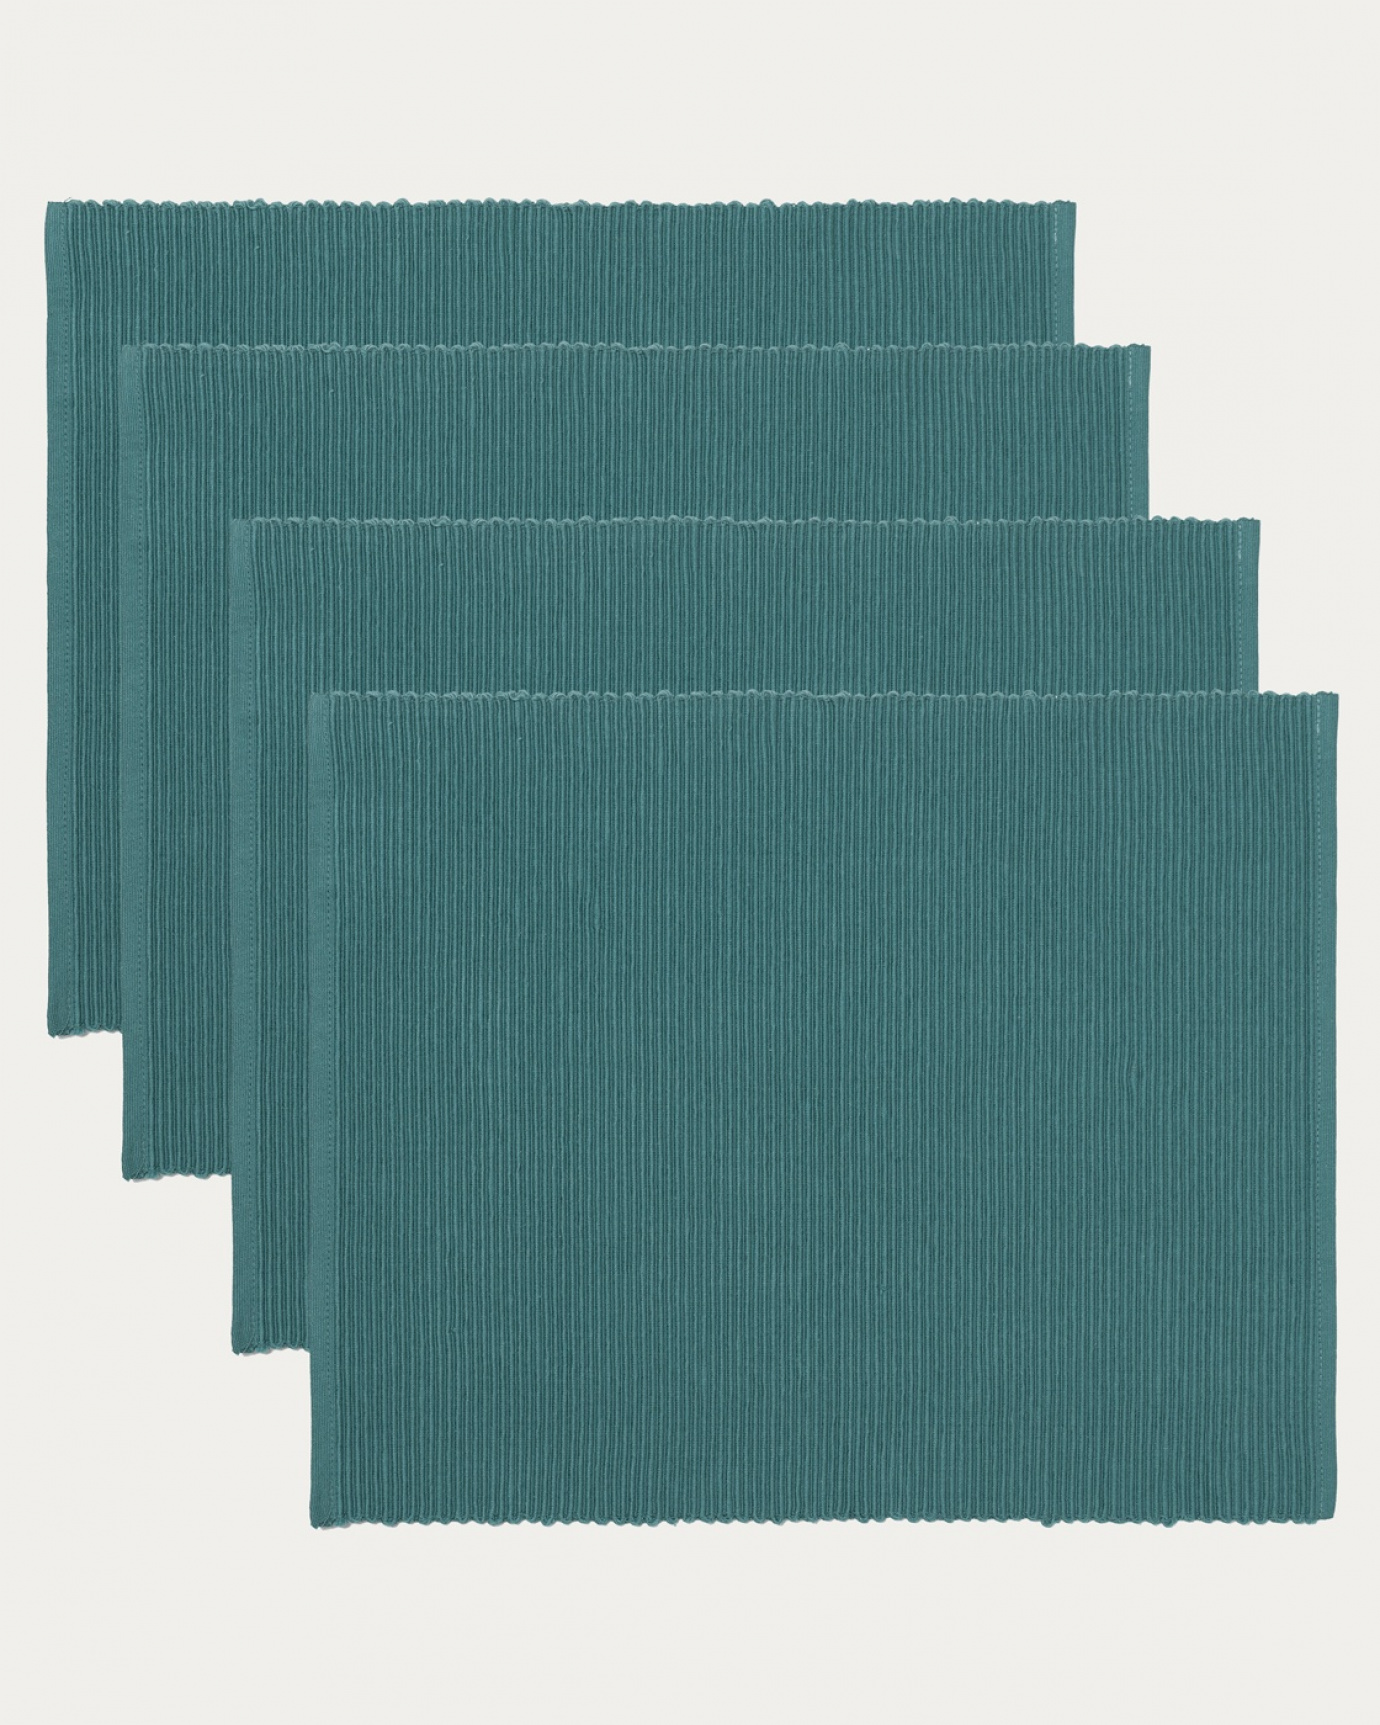 Product image dark grey turquoise UNI placemat made of soft cotton in ribbed quality from LINUM DESIGN. Size 35x46 cm and sold in 4-pack.